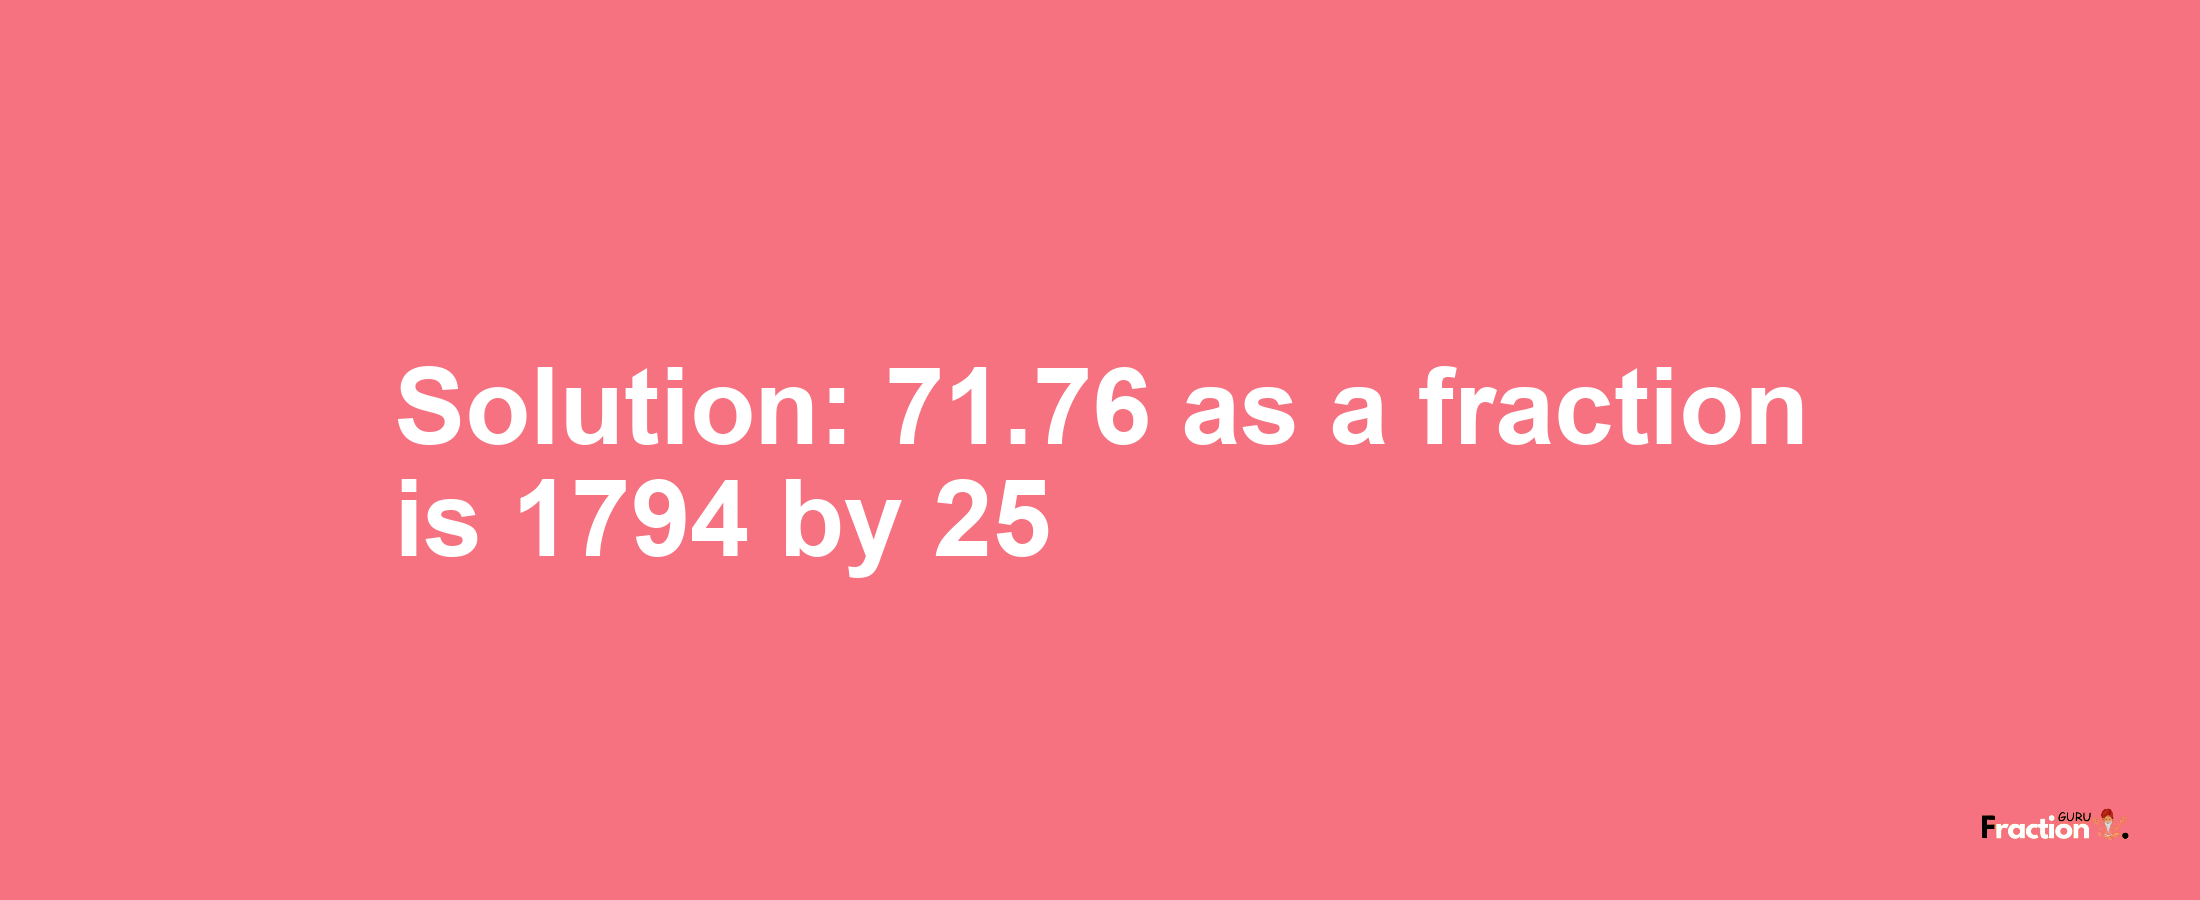 Solution:71.76 as a fraction is 1794/25